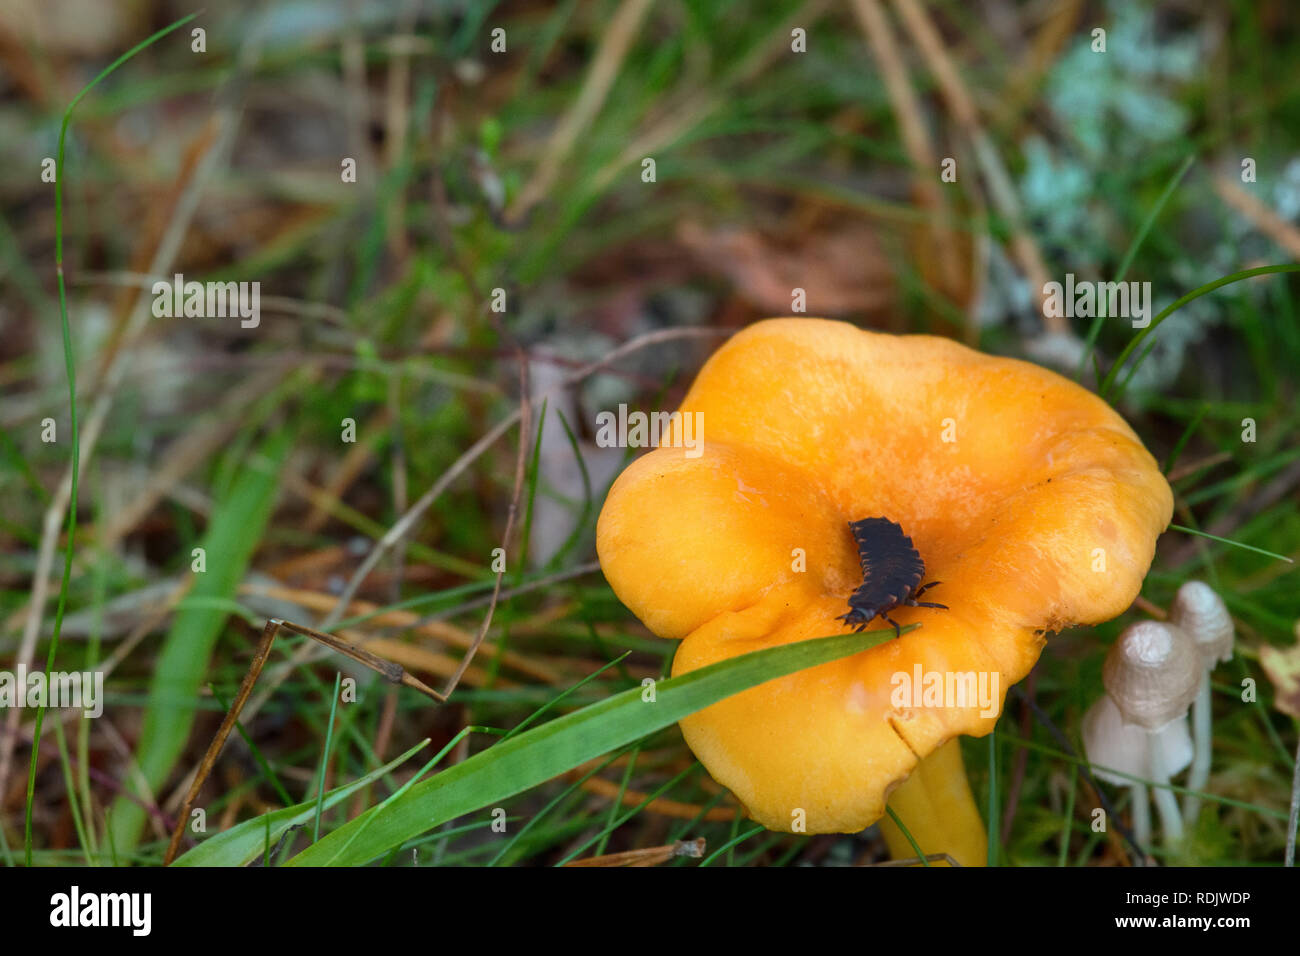 Larva, maggot of Common Firefly (fireworm, lighting bee tie, Lampyris noctiluca) moved from yellow mushroom (chanterelle). Forest ecosystem, forest fi Stock Photo